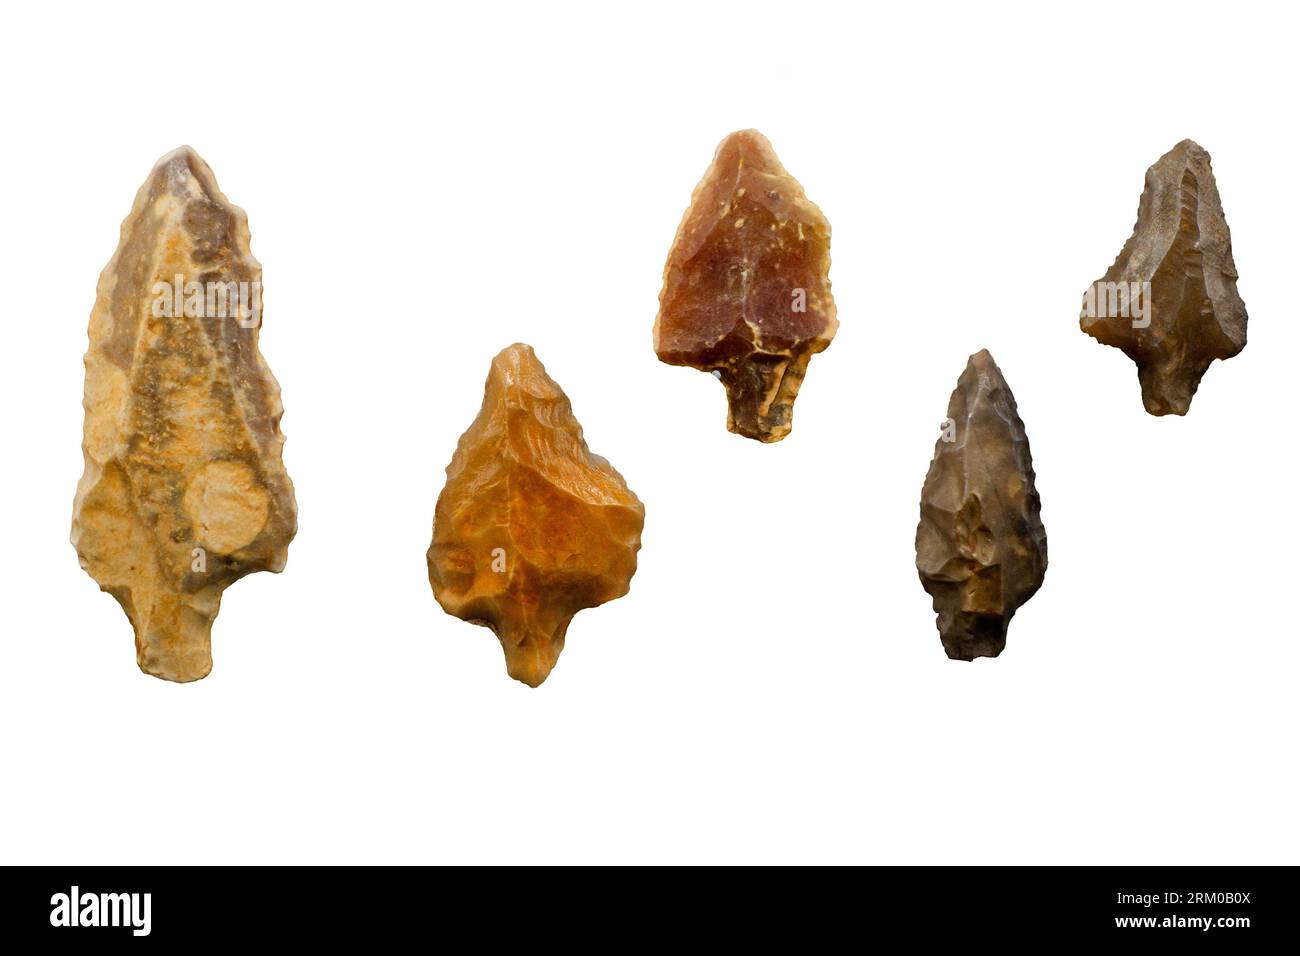 Collection of Paleolithic tanged points made of flint from the Pleistocene / Ice Age / Glacial Epoch found in Morocco against white background Stock Photo